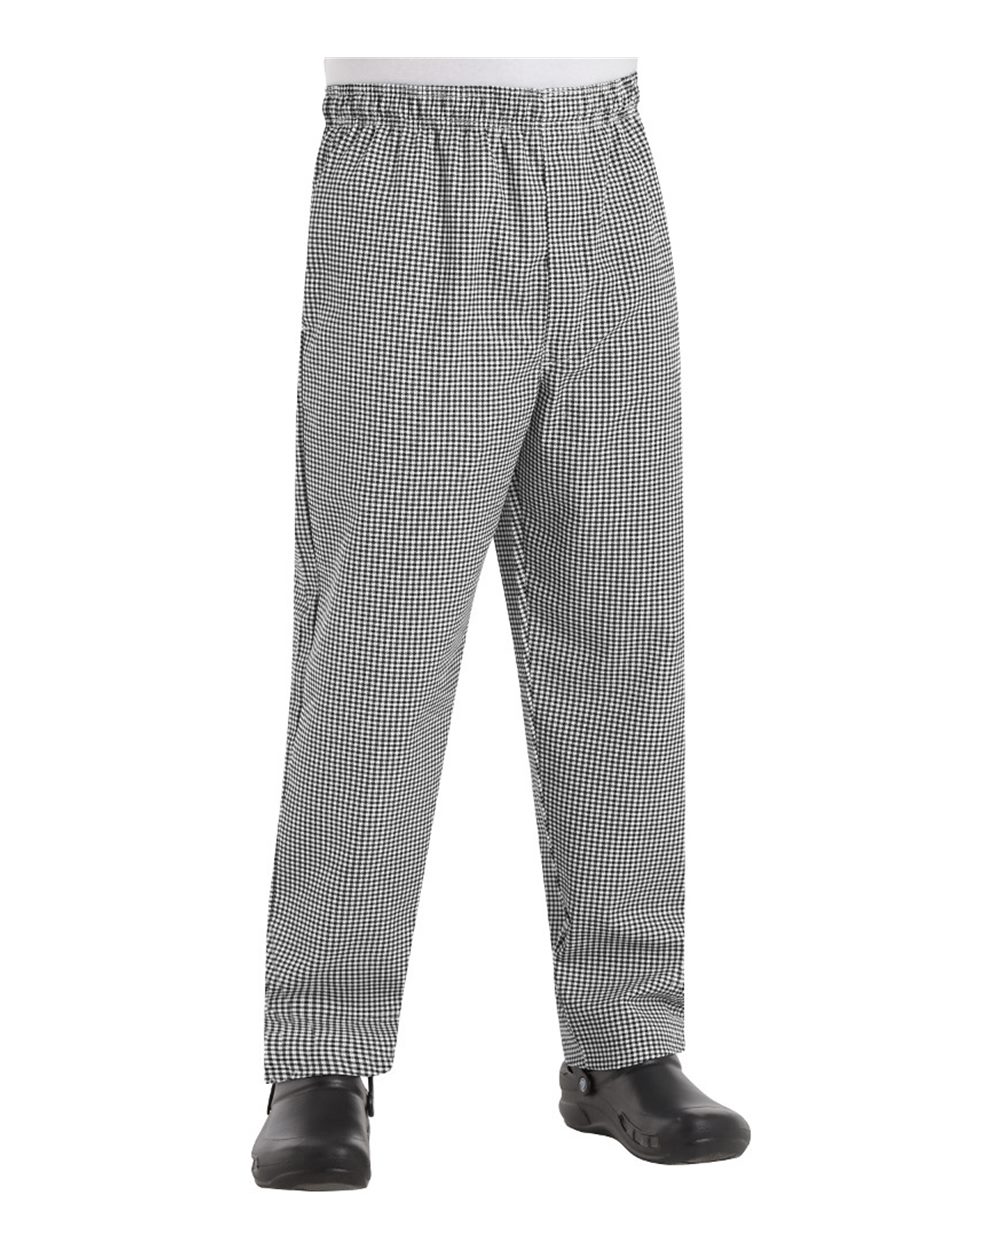 Baggy Chef Pants with Zipper Fly-Chef Designs